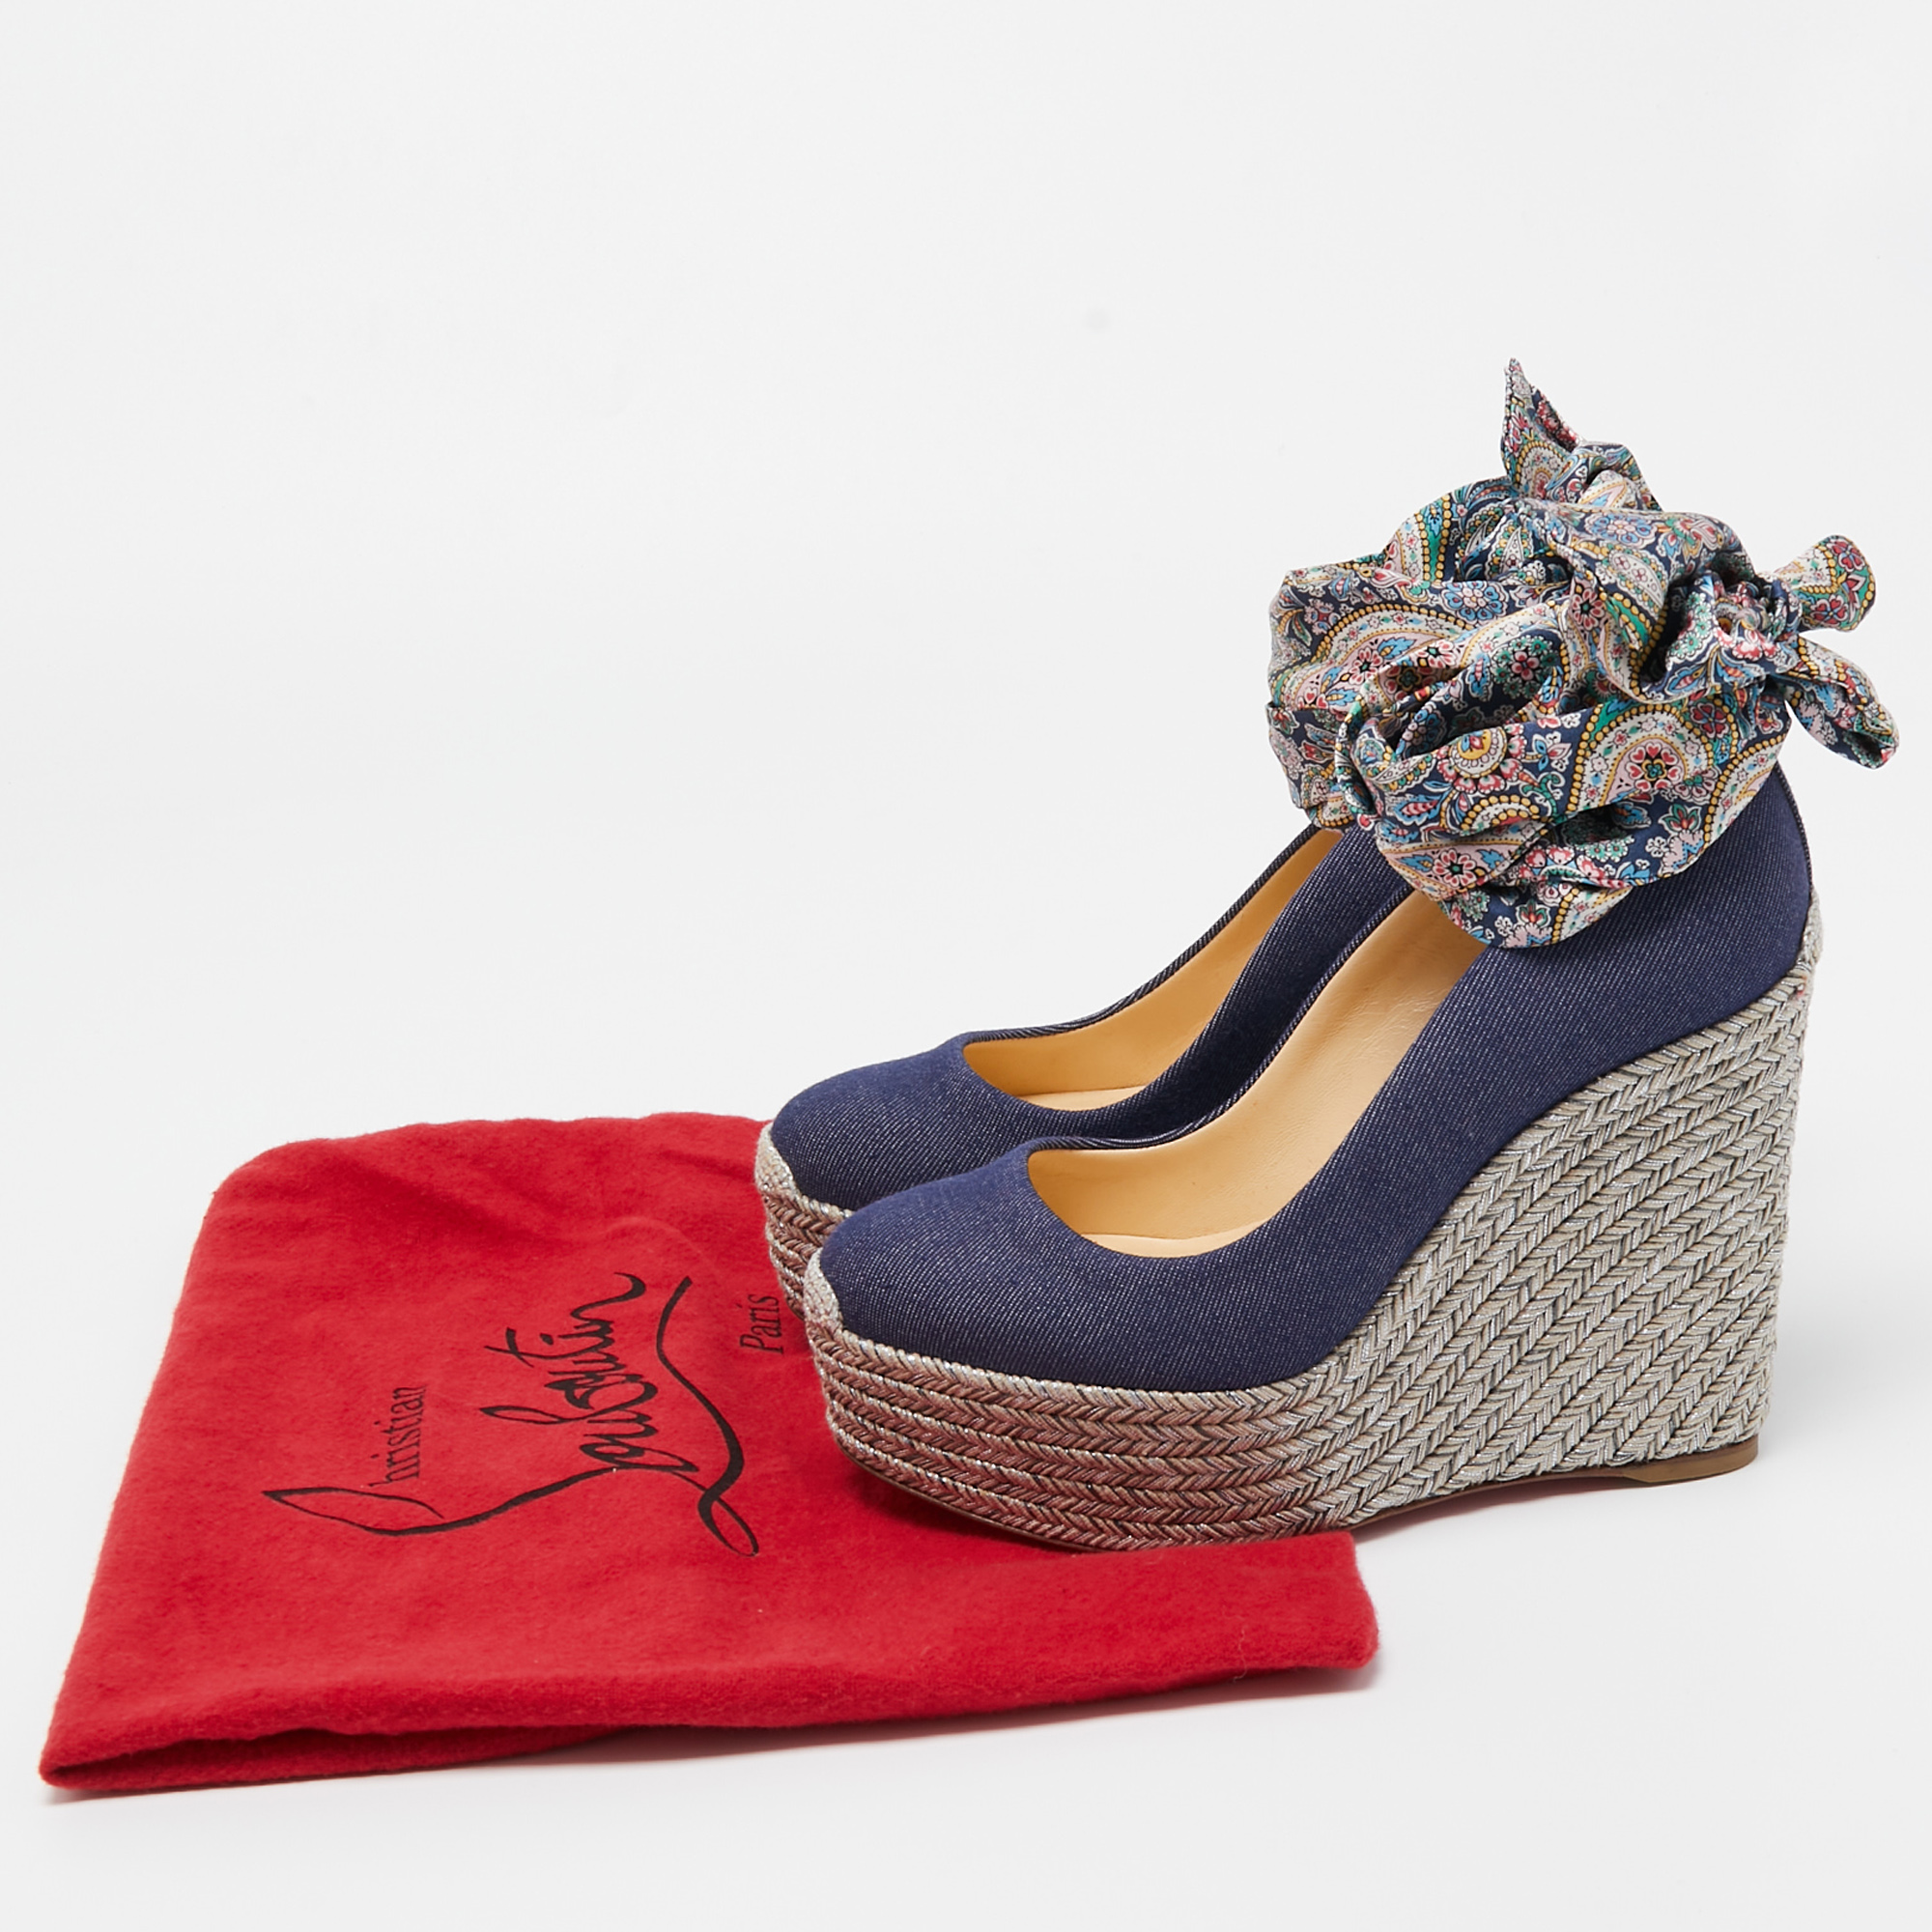 Christian Louboutin Blue Denim And Printed Fabric Barbaria Zeppa Ankle Tie Pumps Size 35